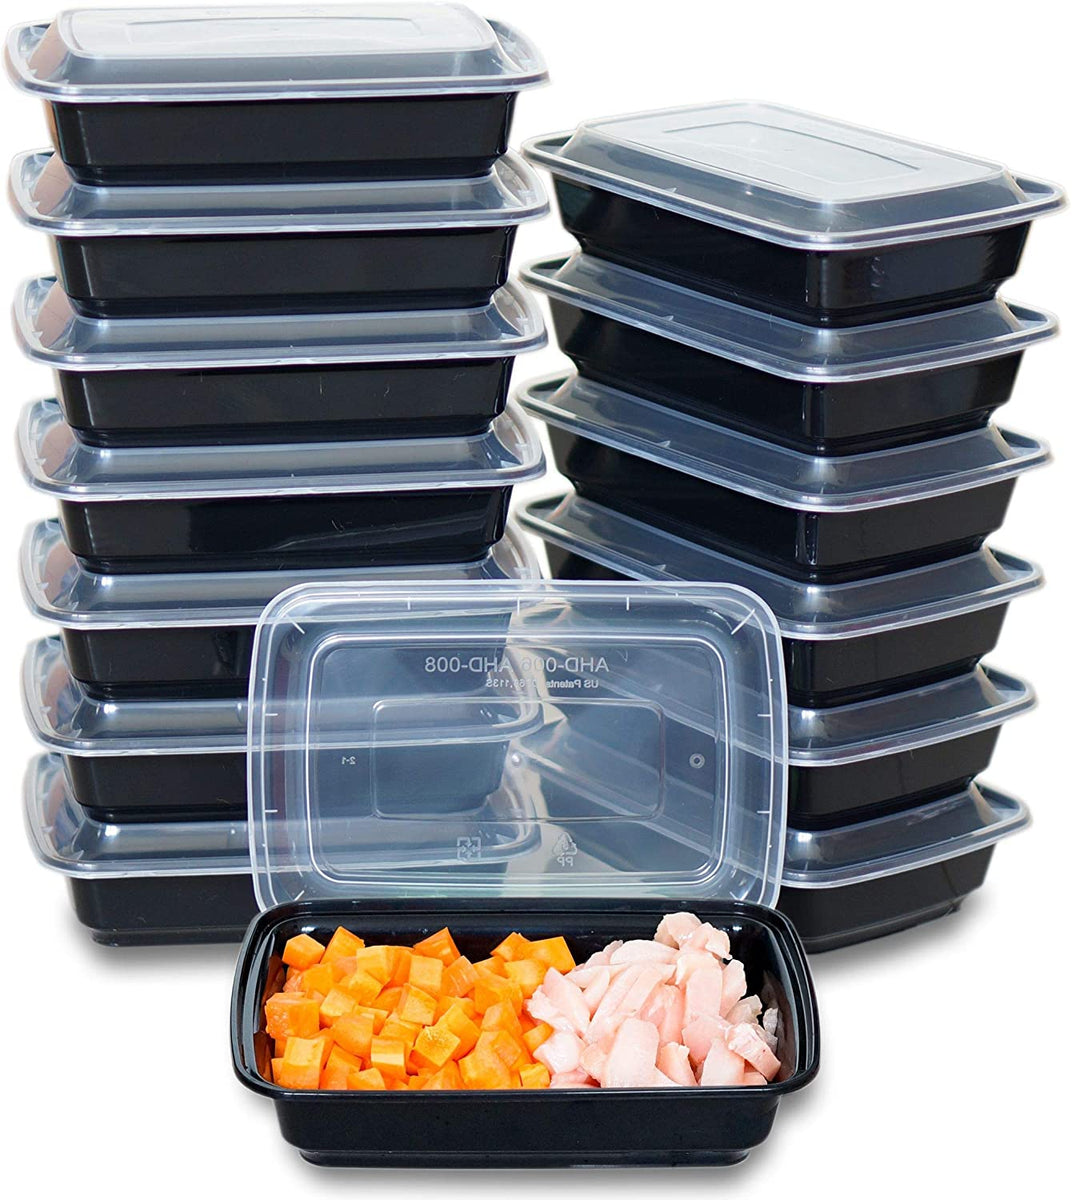 Signature Select Meal Prep Containers With Lids - 10 CT